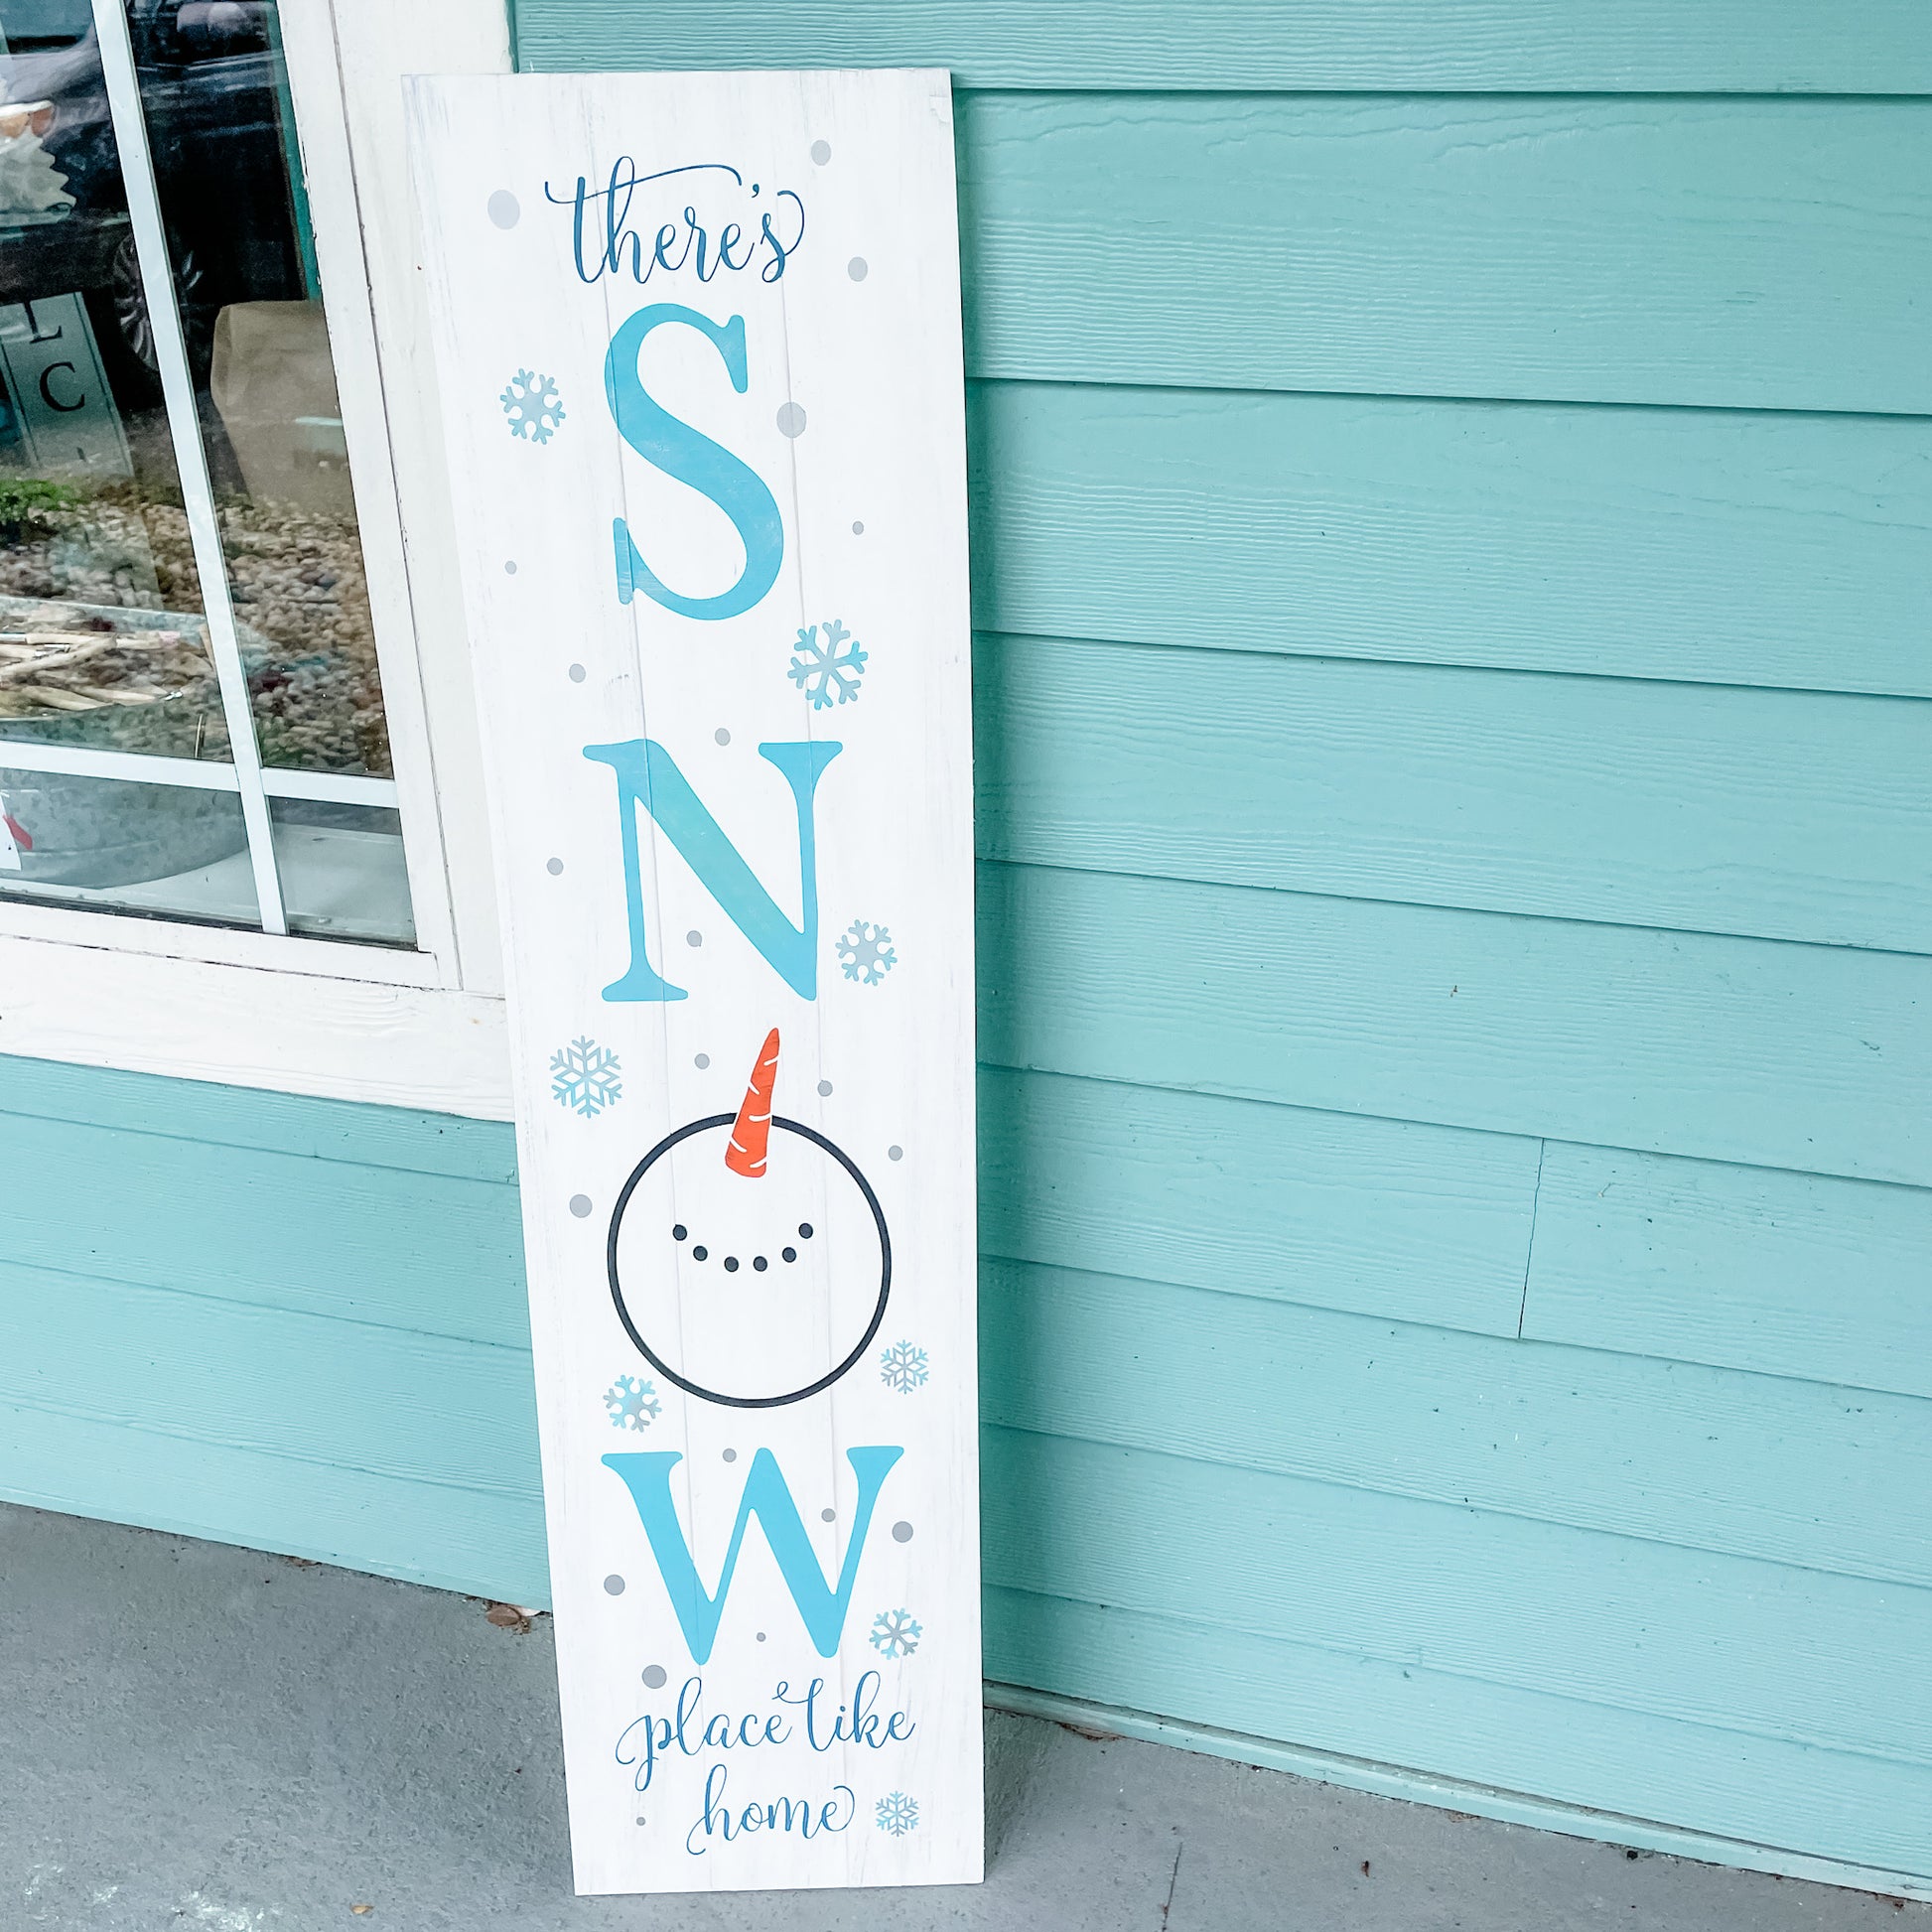 There's SNOW place like home (vertical): Plank Design - Paisley Grace Makery